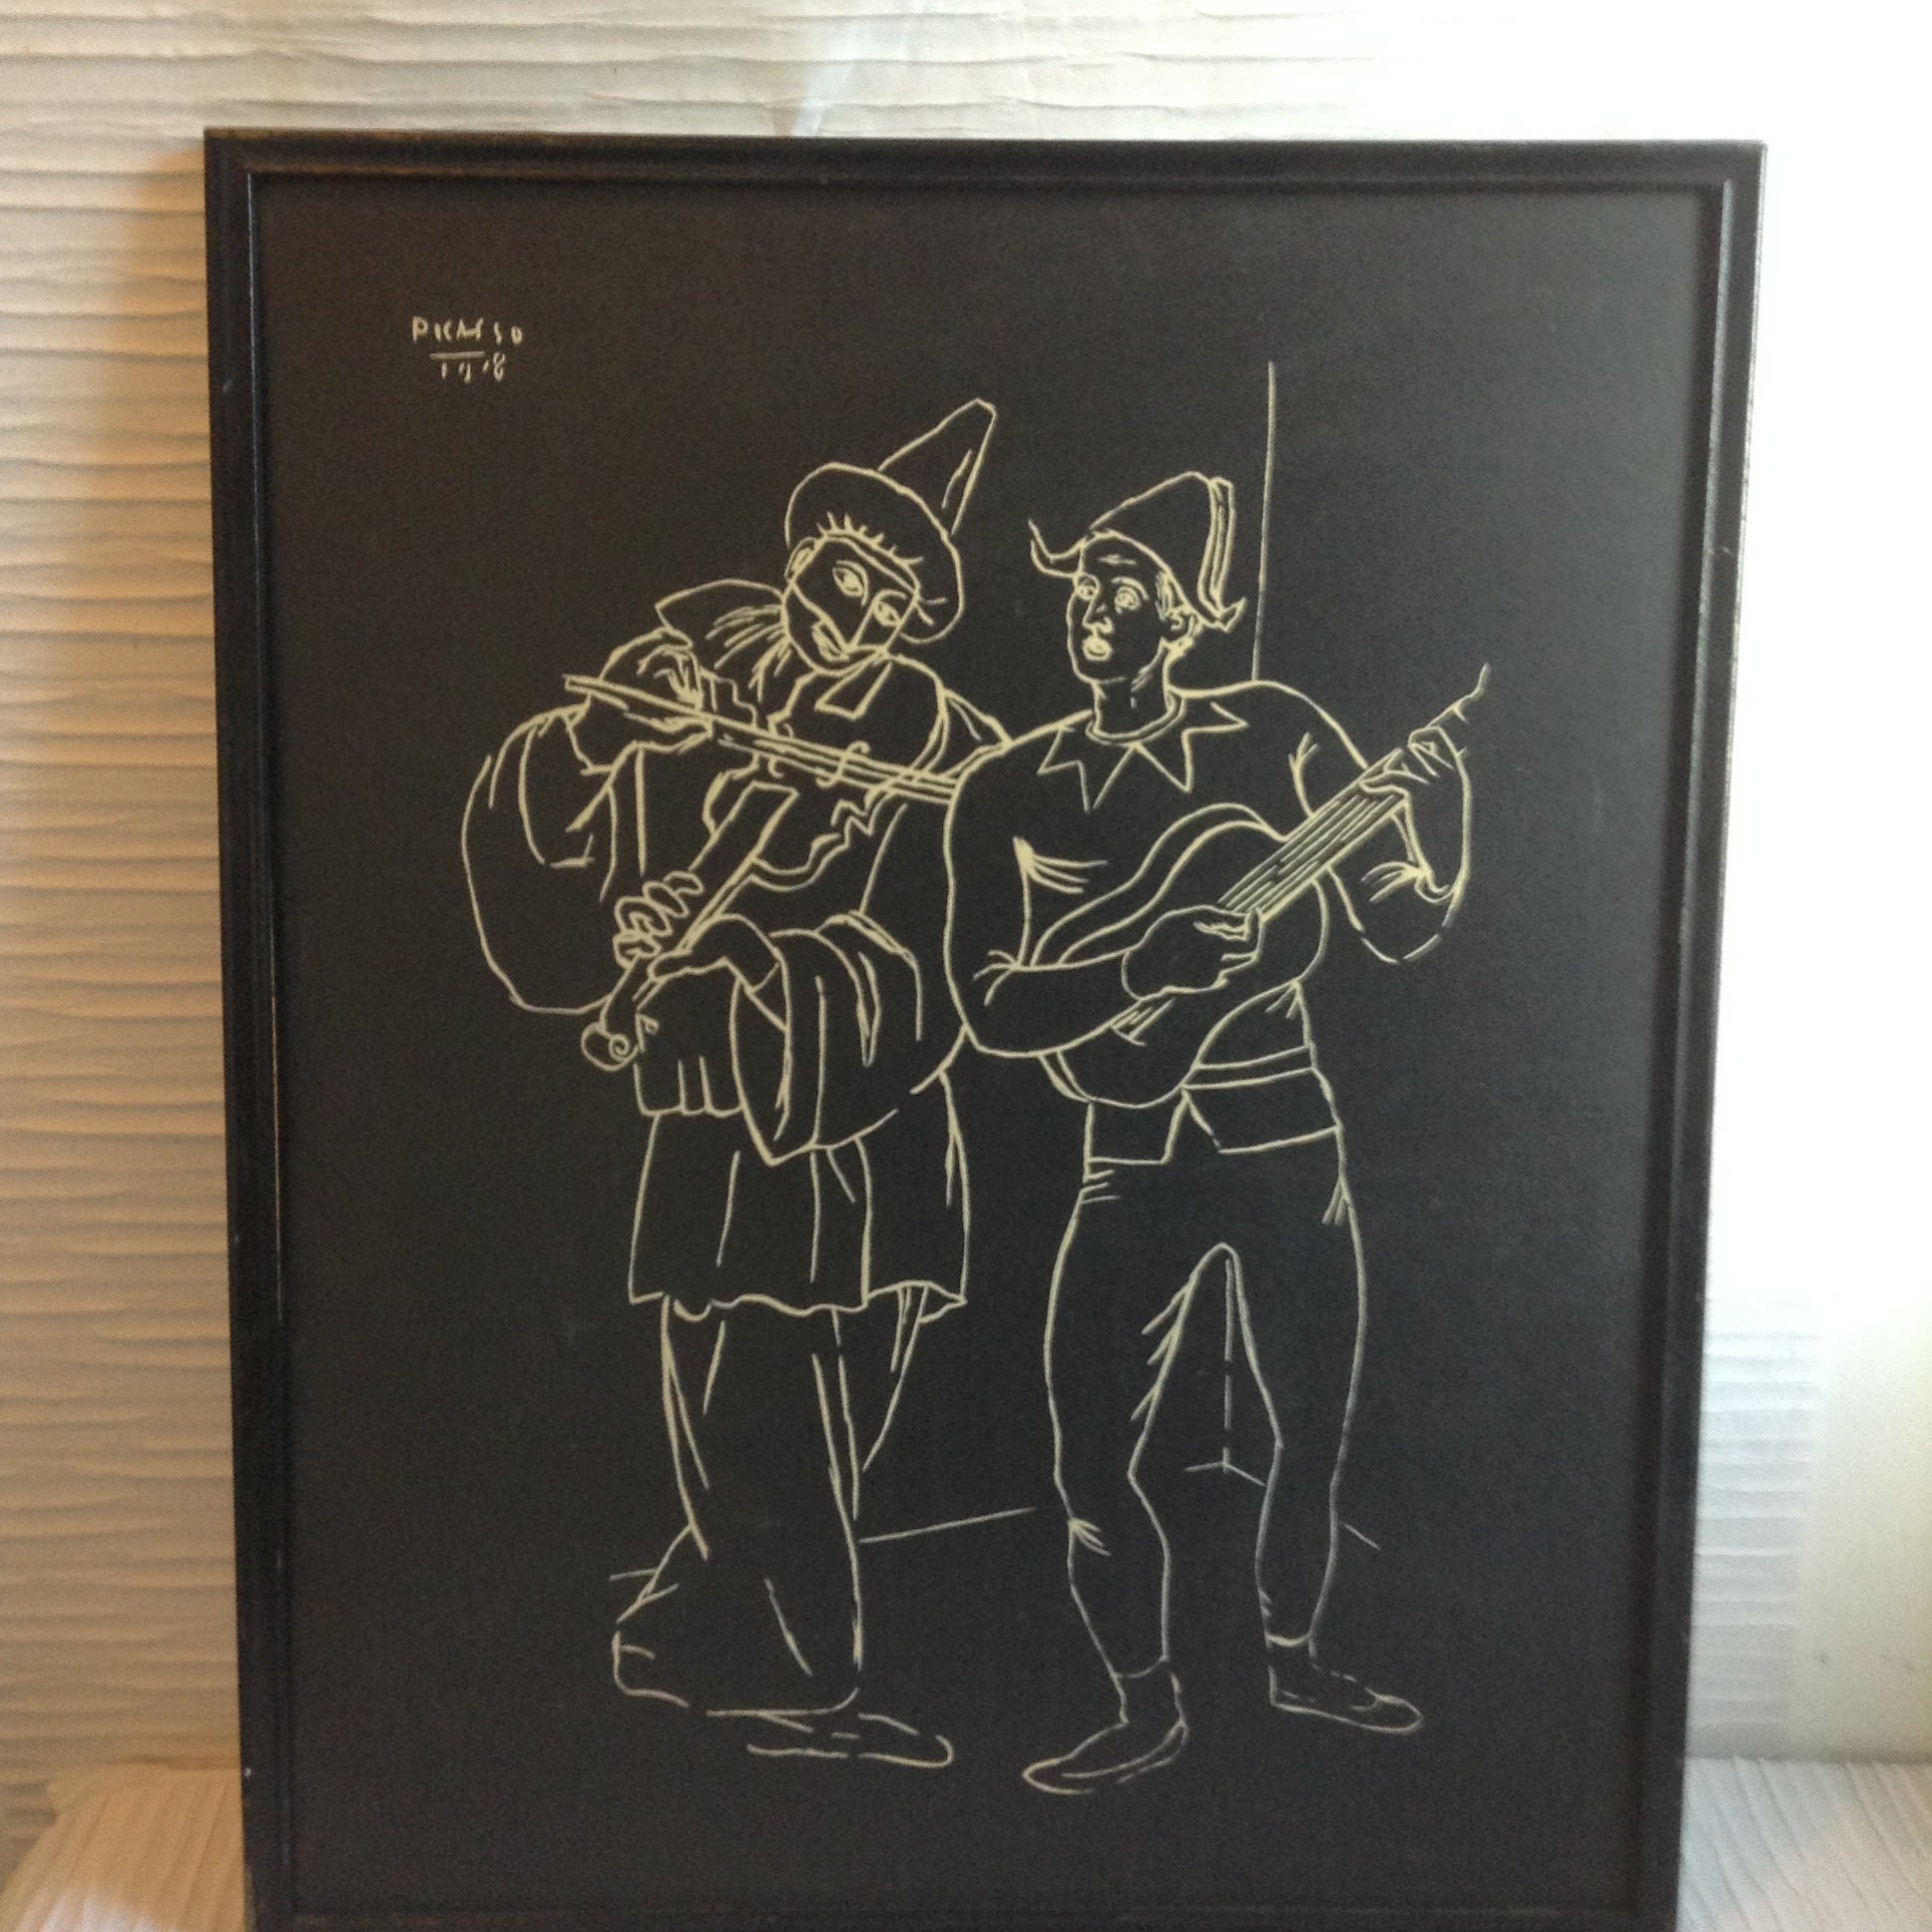 Eames Era Framed vintage 1950 Picasso White Lithograph on Black Board Mid Century Modern. Art print by Pablo Picasso